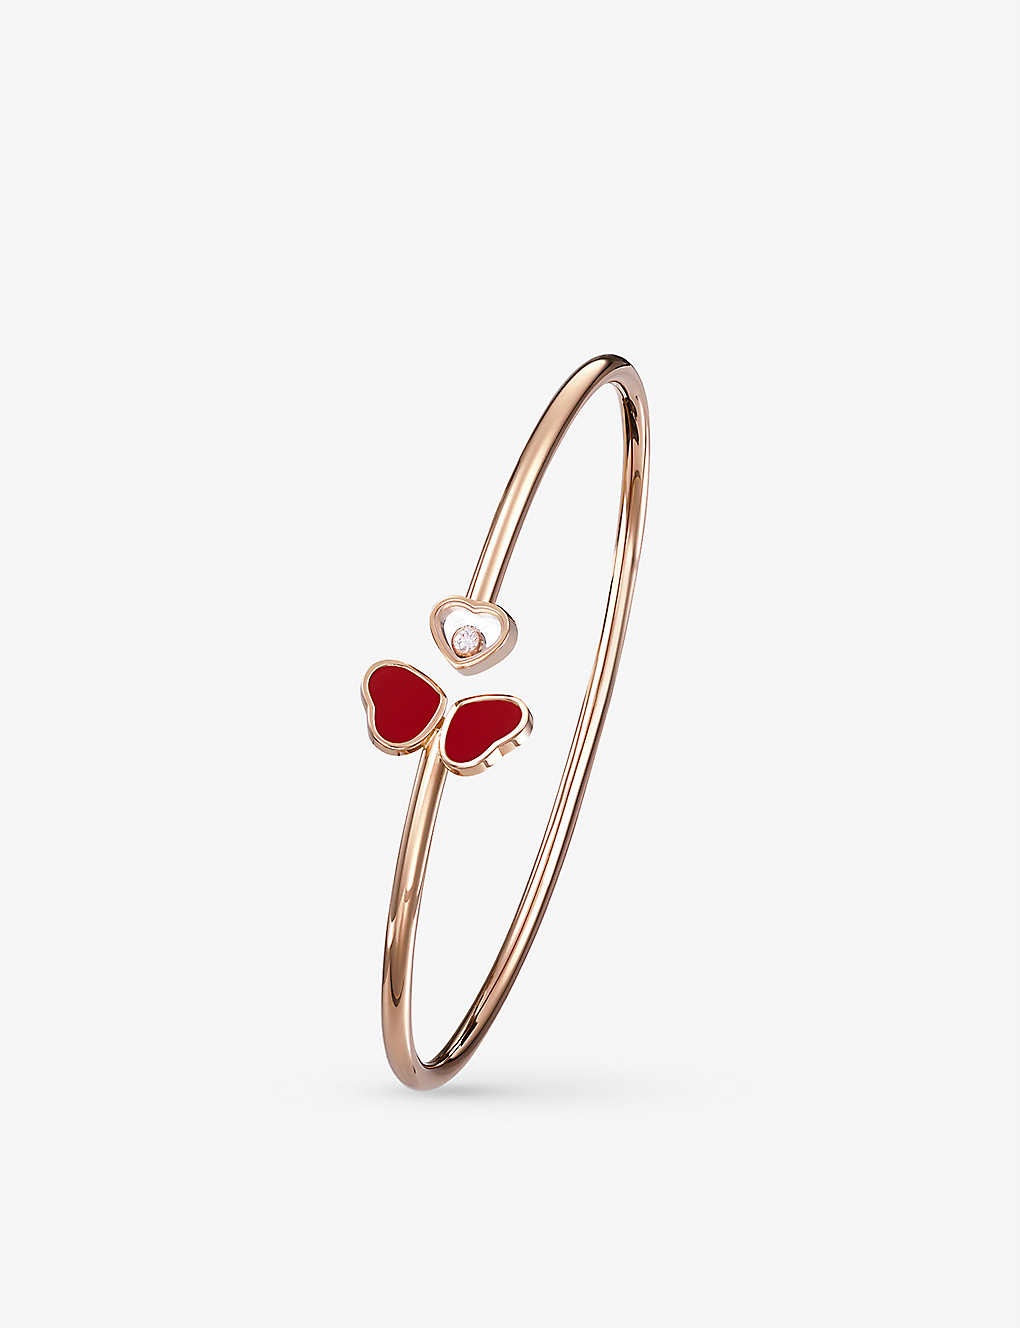 Happy Hearts Wings 18ct rose-gold, 0.05ct diamond and red-stone bangle bracelet - 4